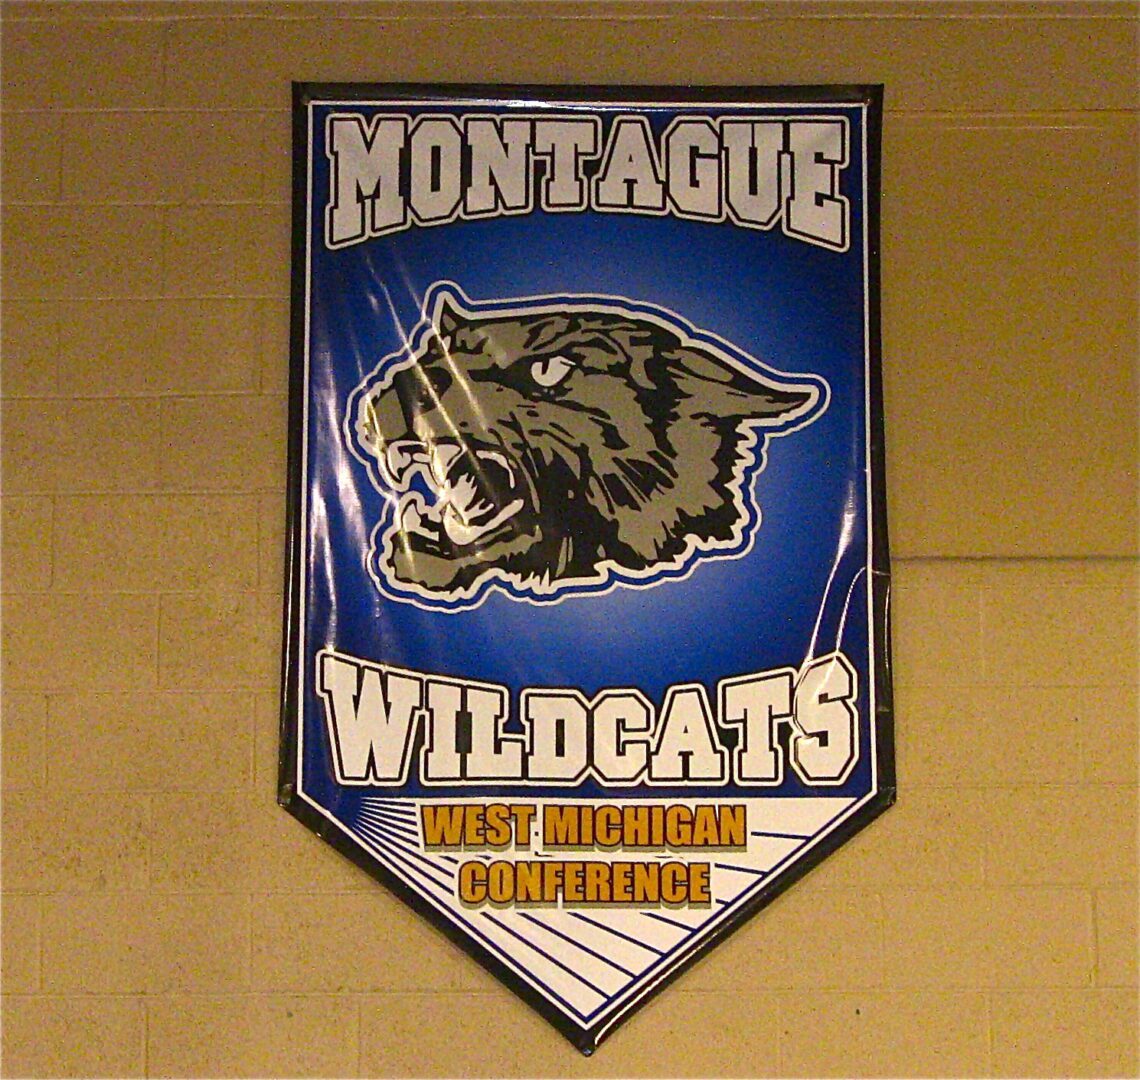 Montague routs Whitehall in baseball doubleheader